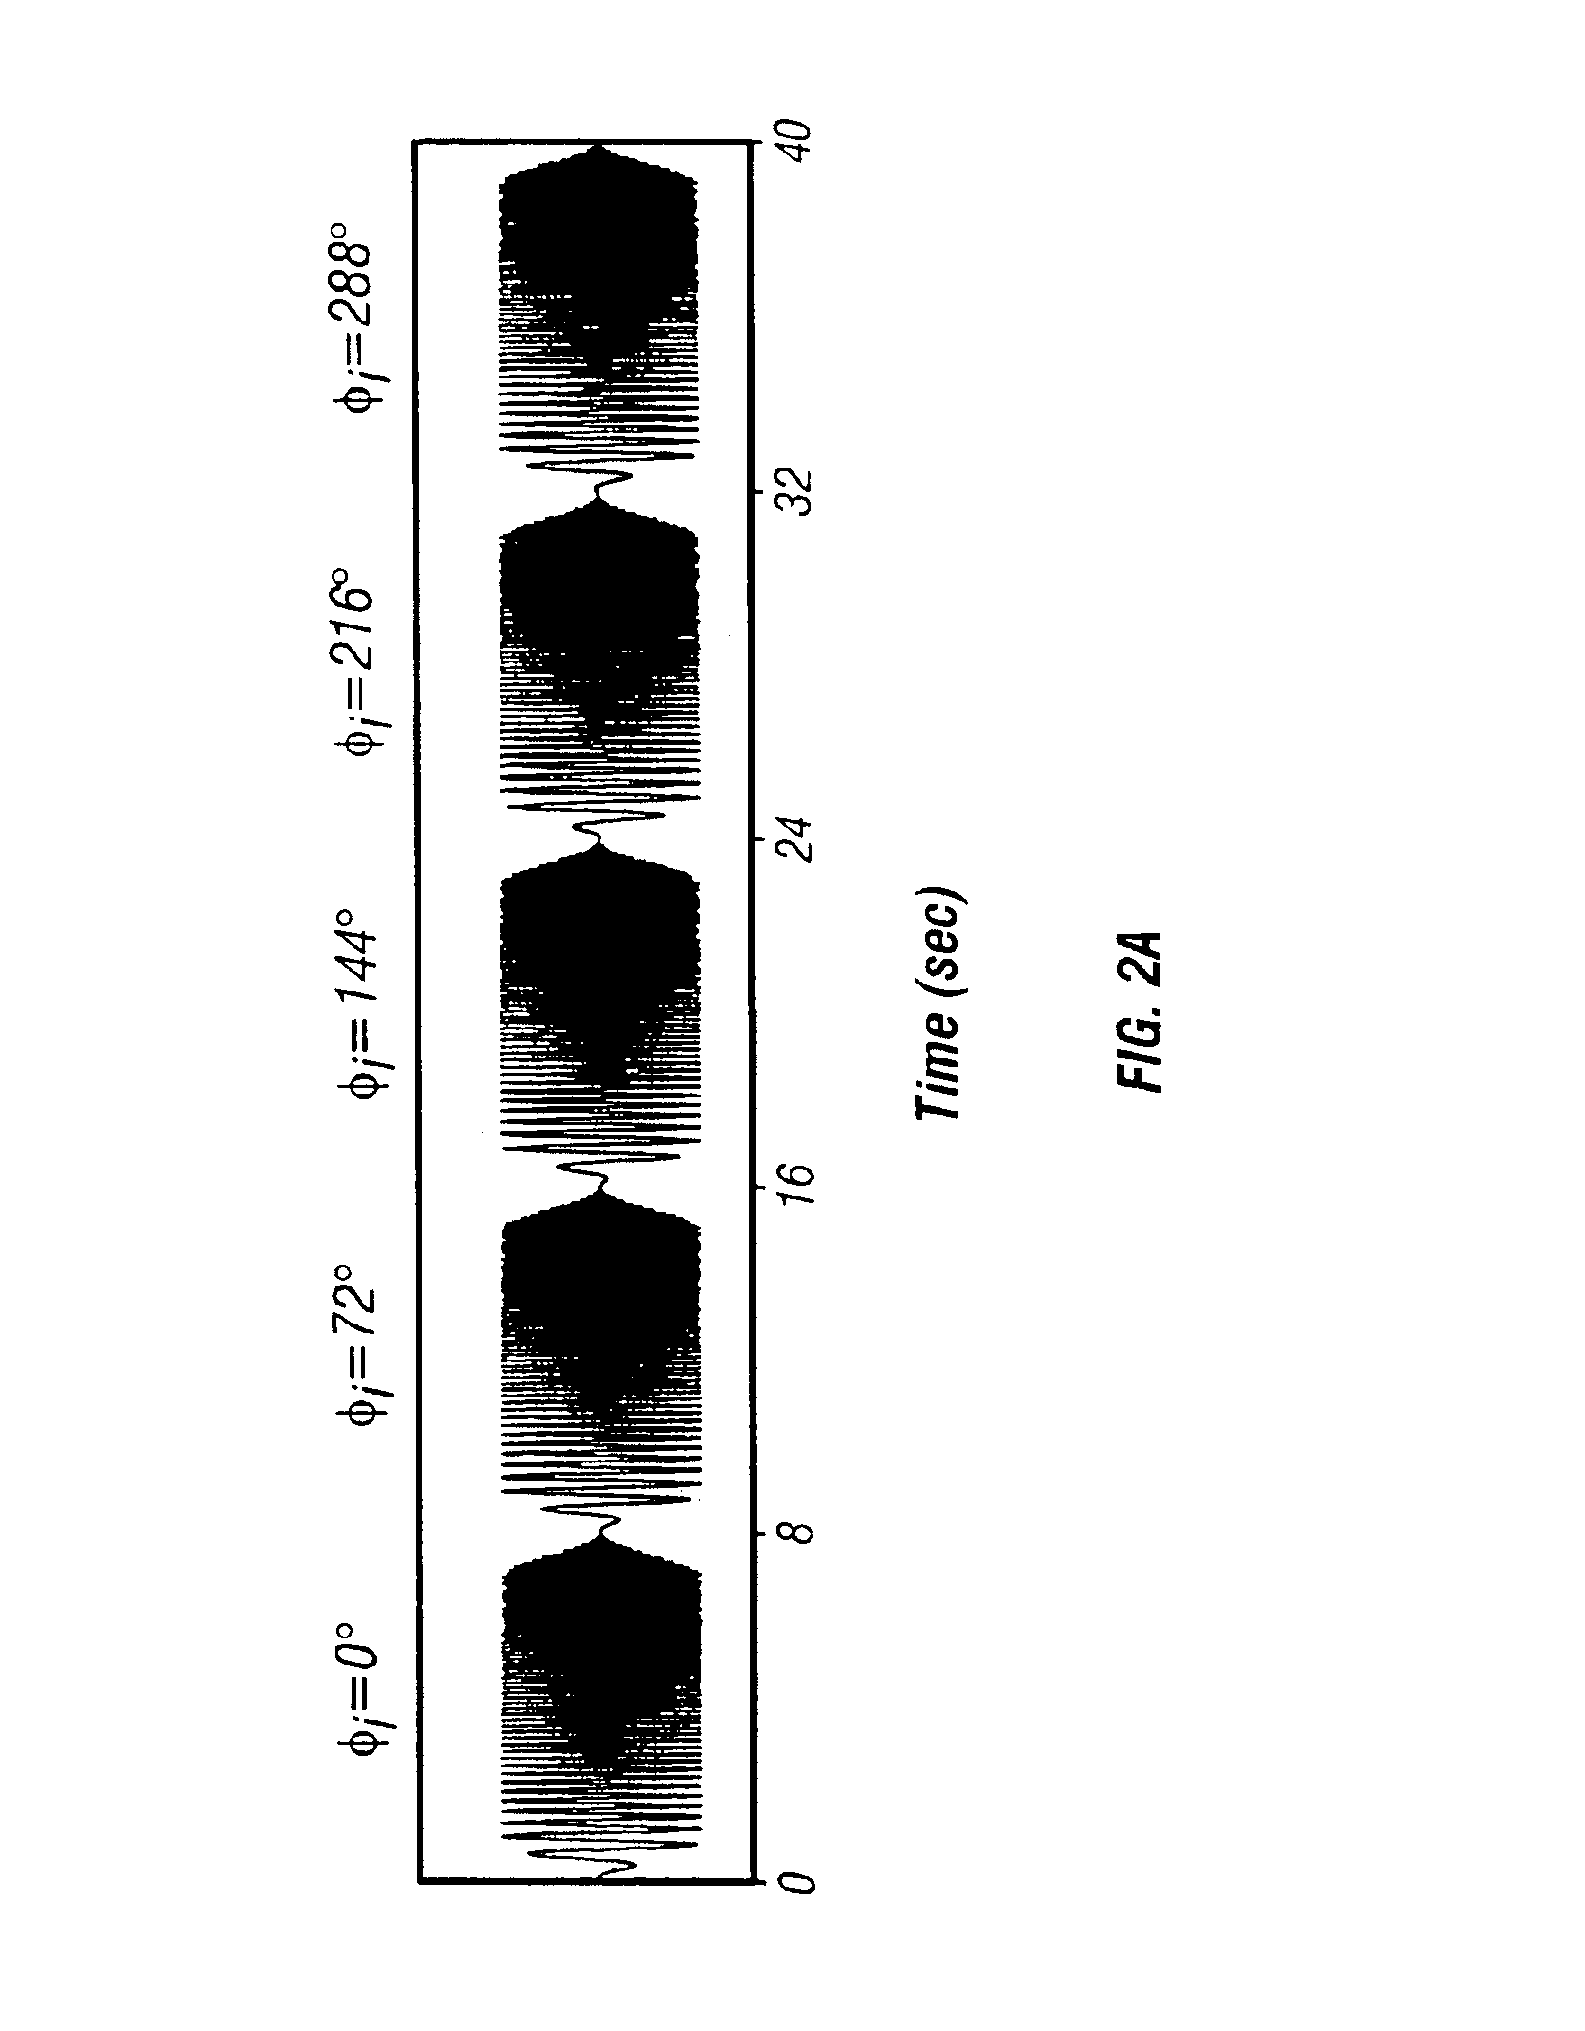 Method of using cascaded sweeps for source coding and harmonic cancellation